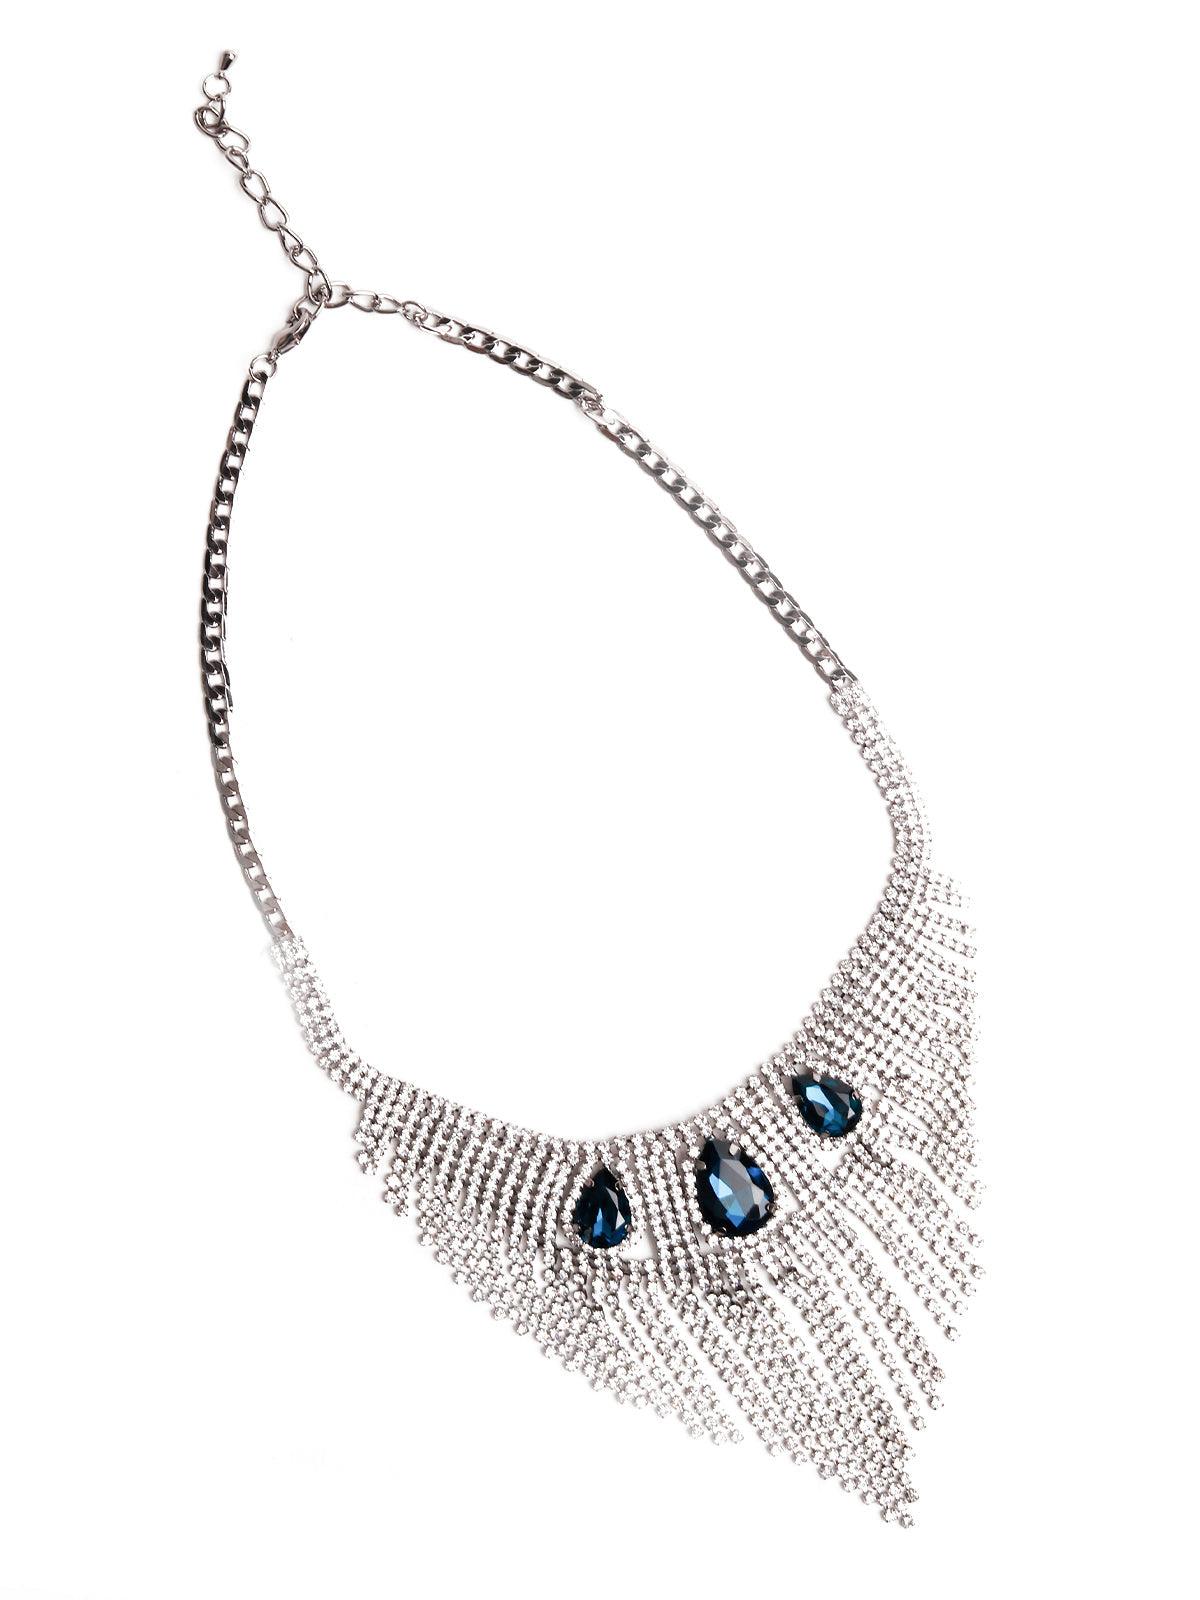 Women's Gorgeous Crystal Necklace Embellished With Blue Stone - Odette